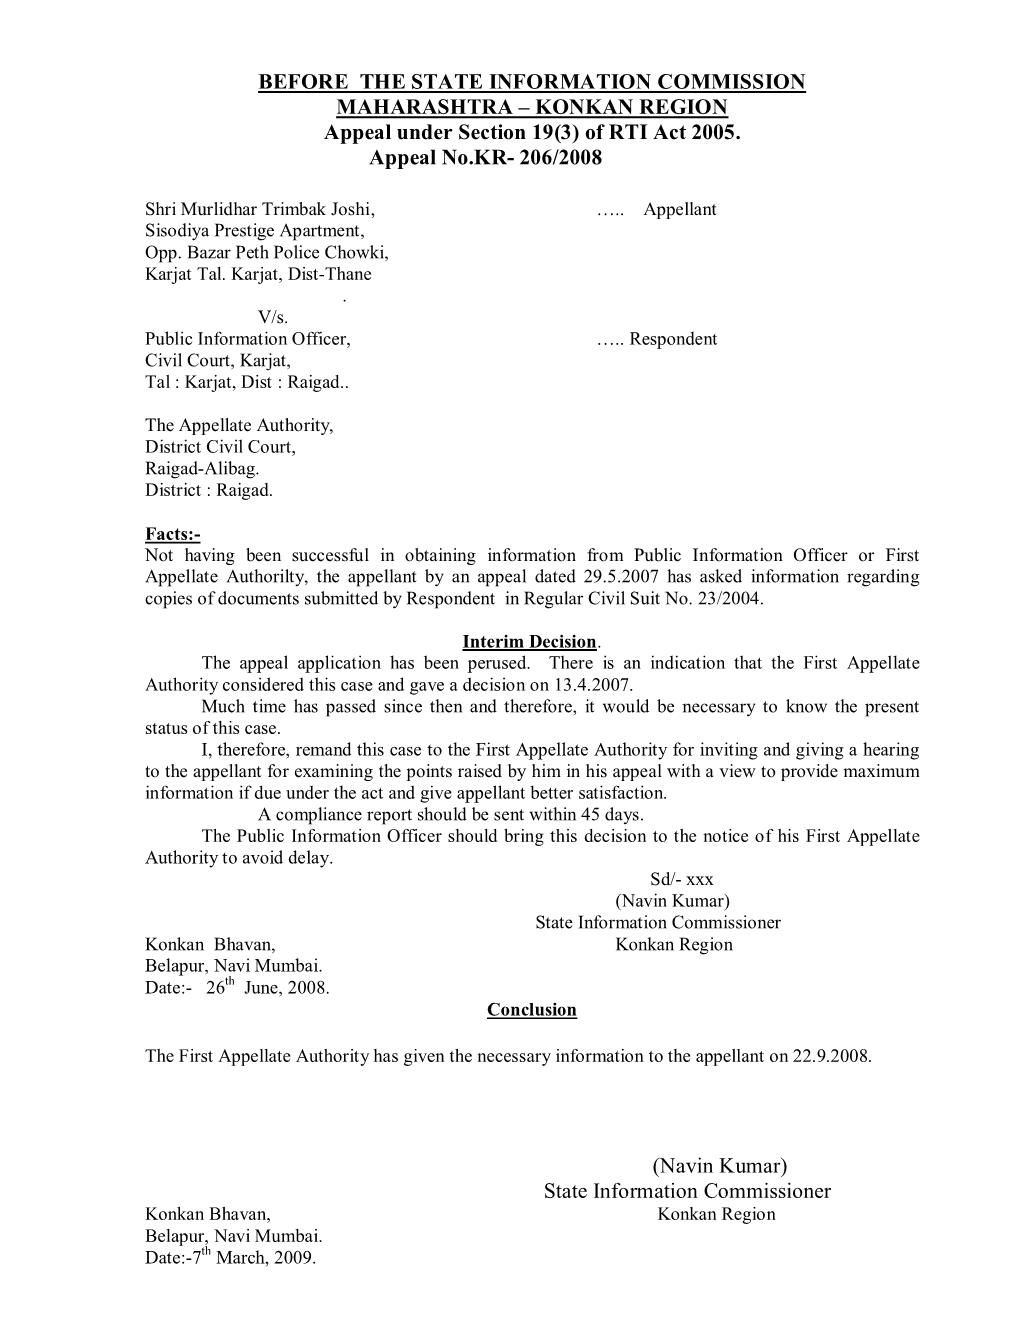 KONKAN REGION Appeal Under Section 19(3) of RTI Act 2005